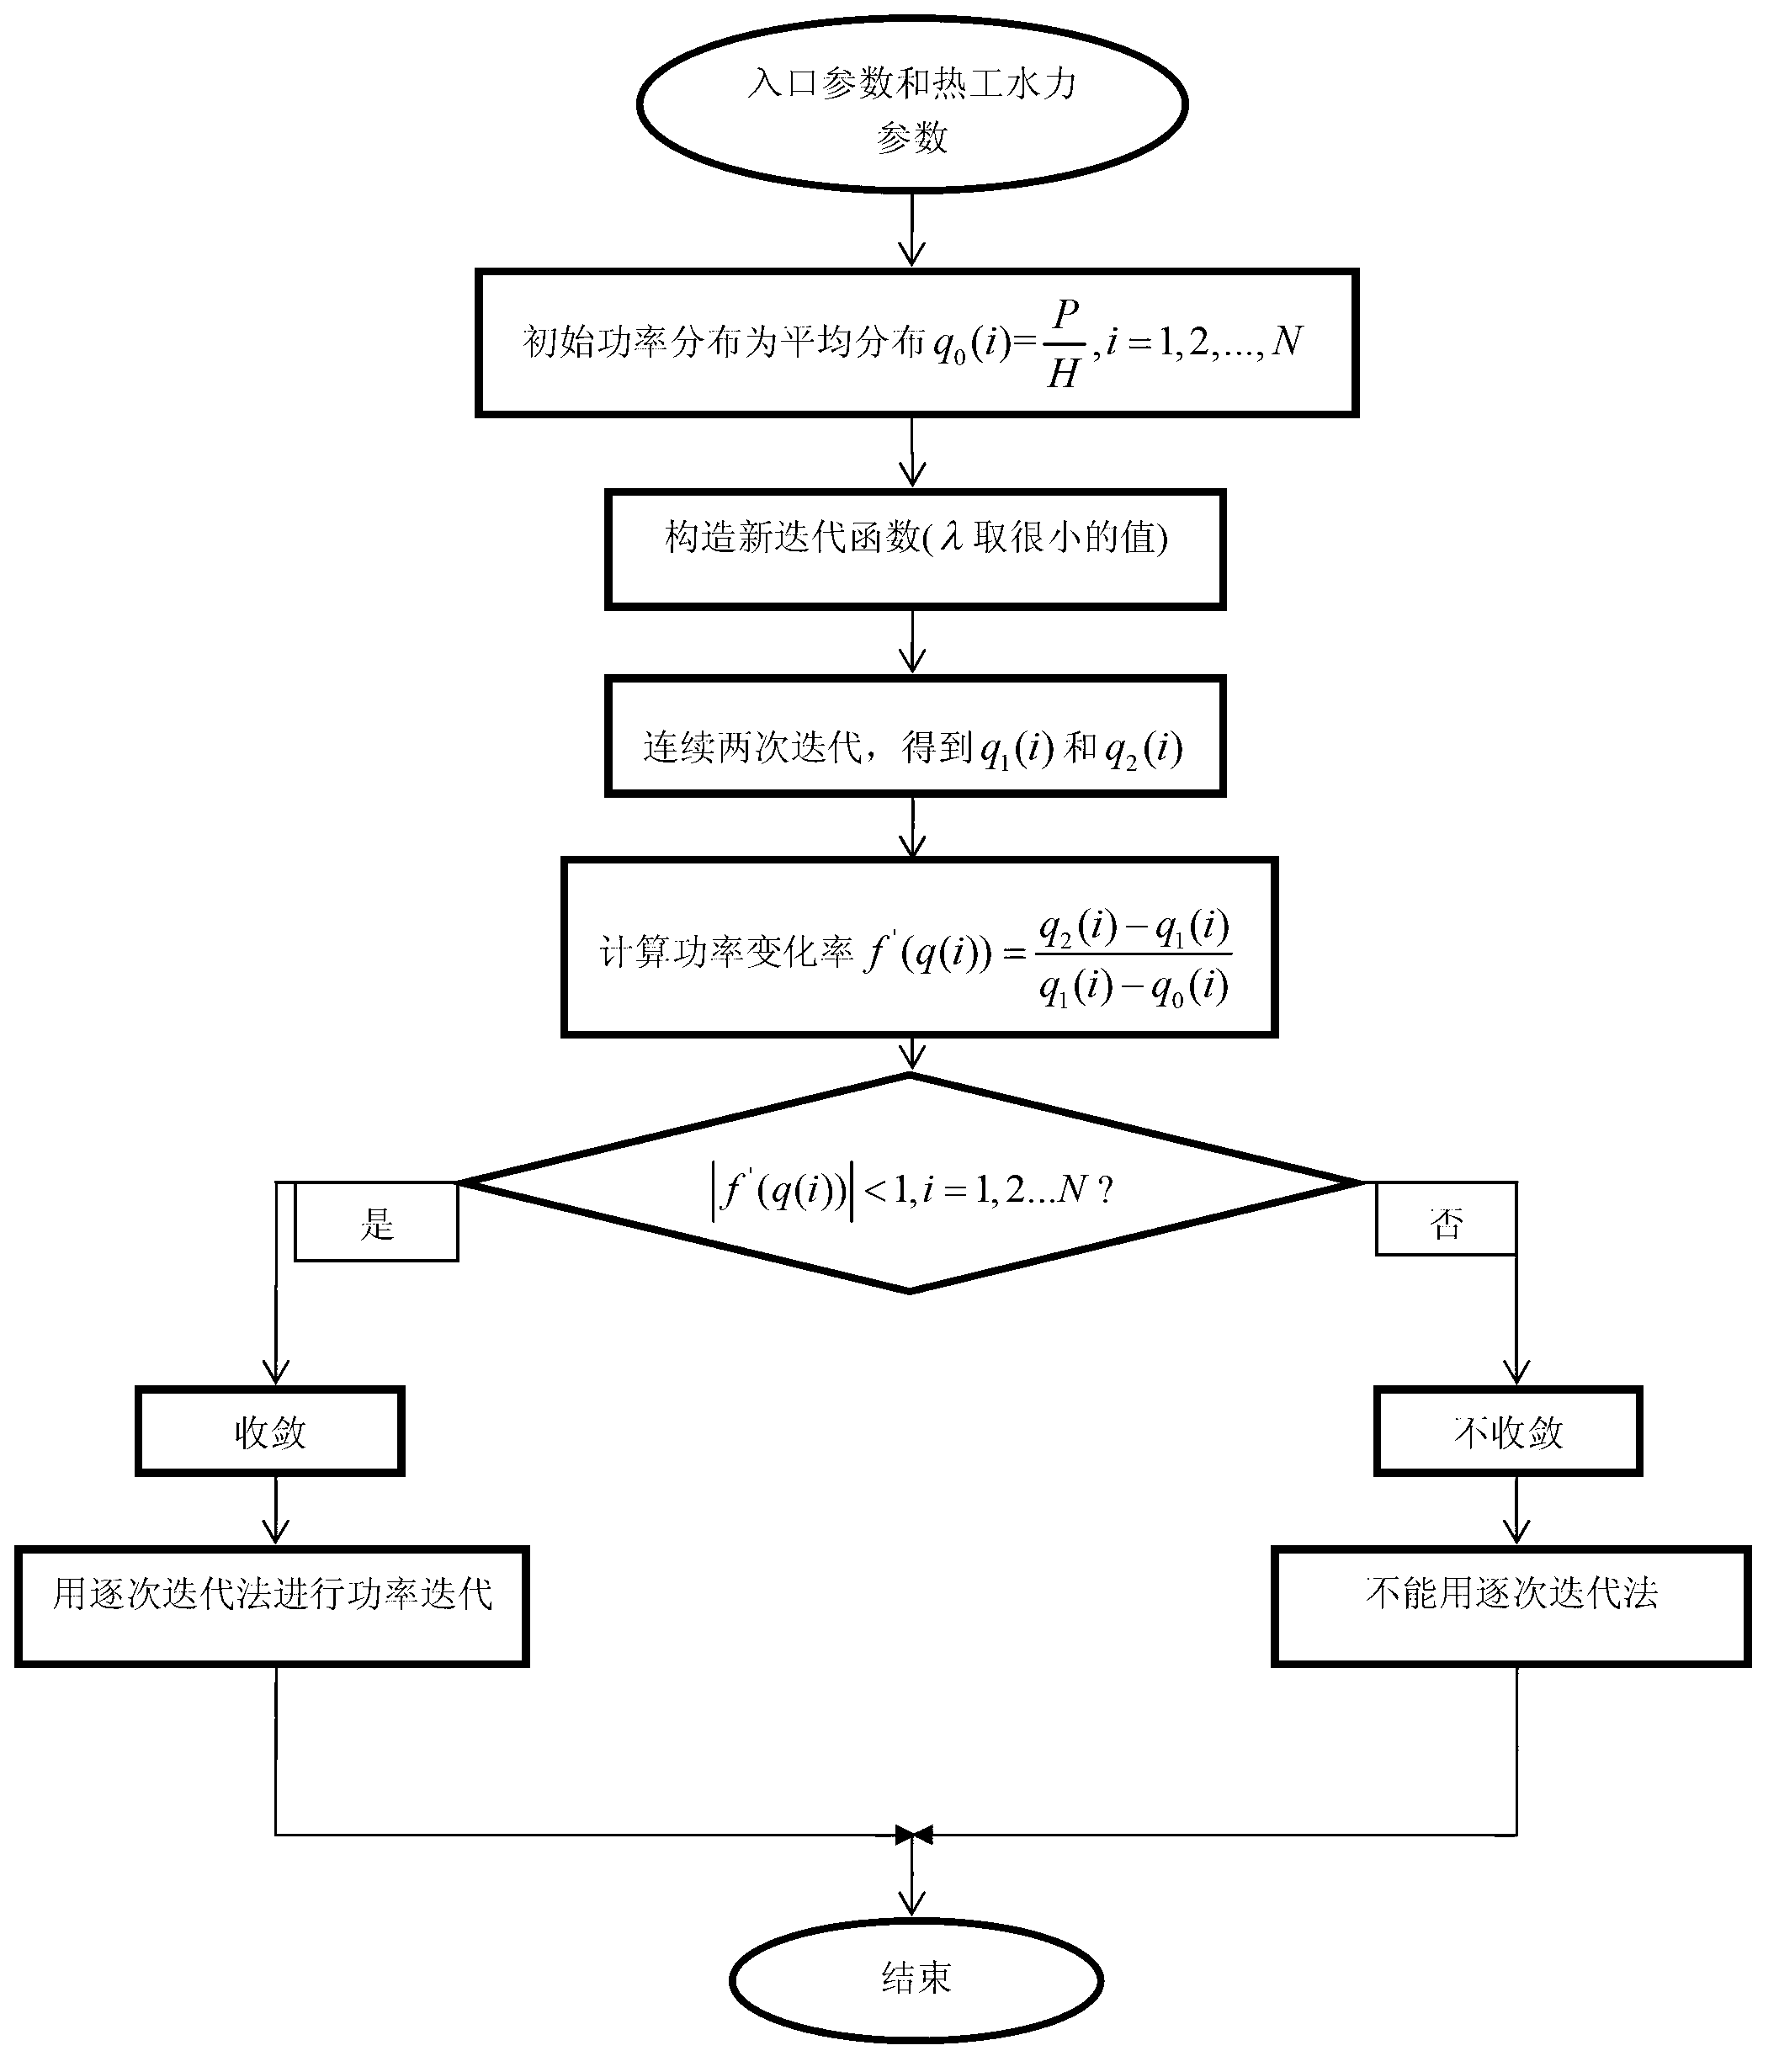 Nuclear thermal coupling computing method for nuclear reactor